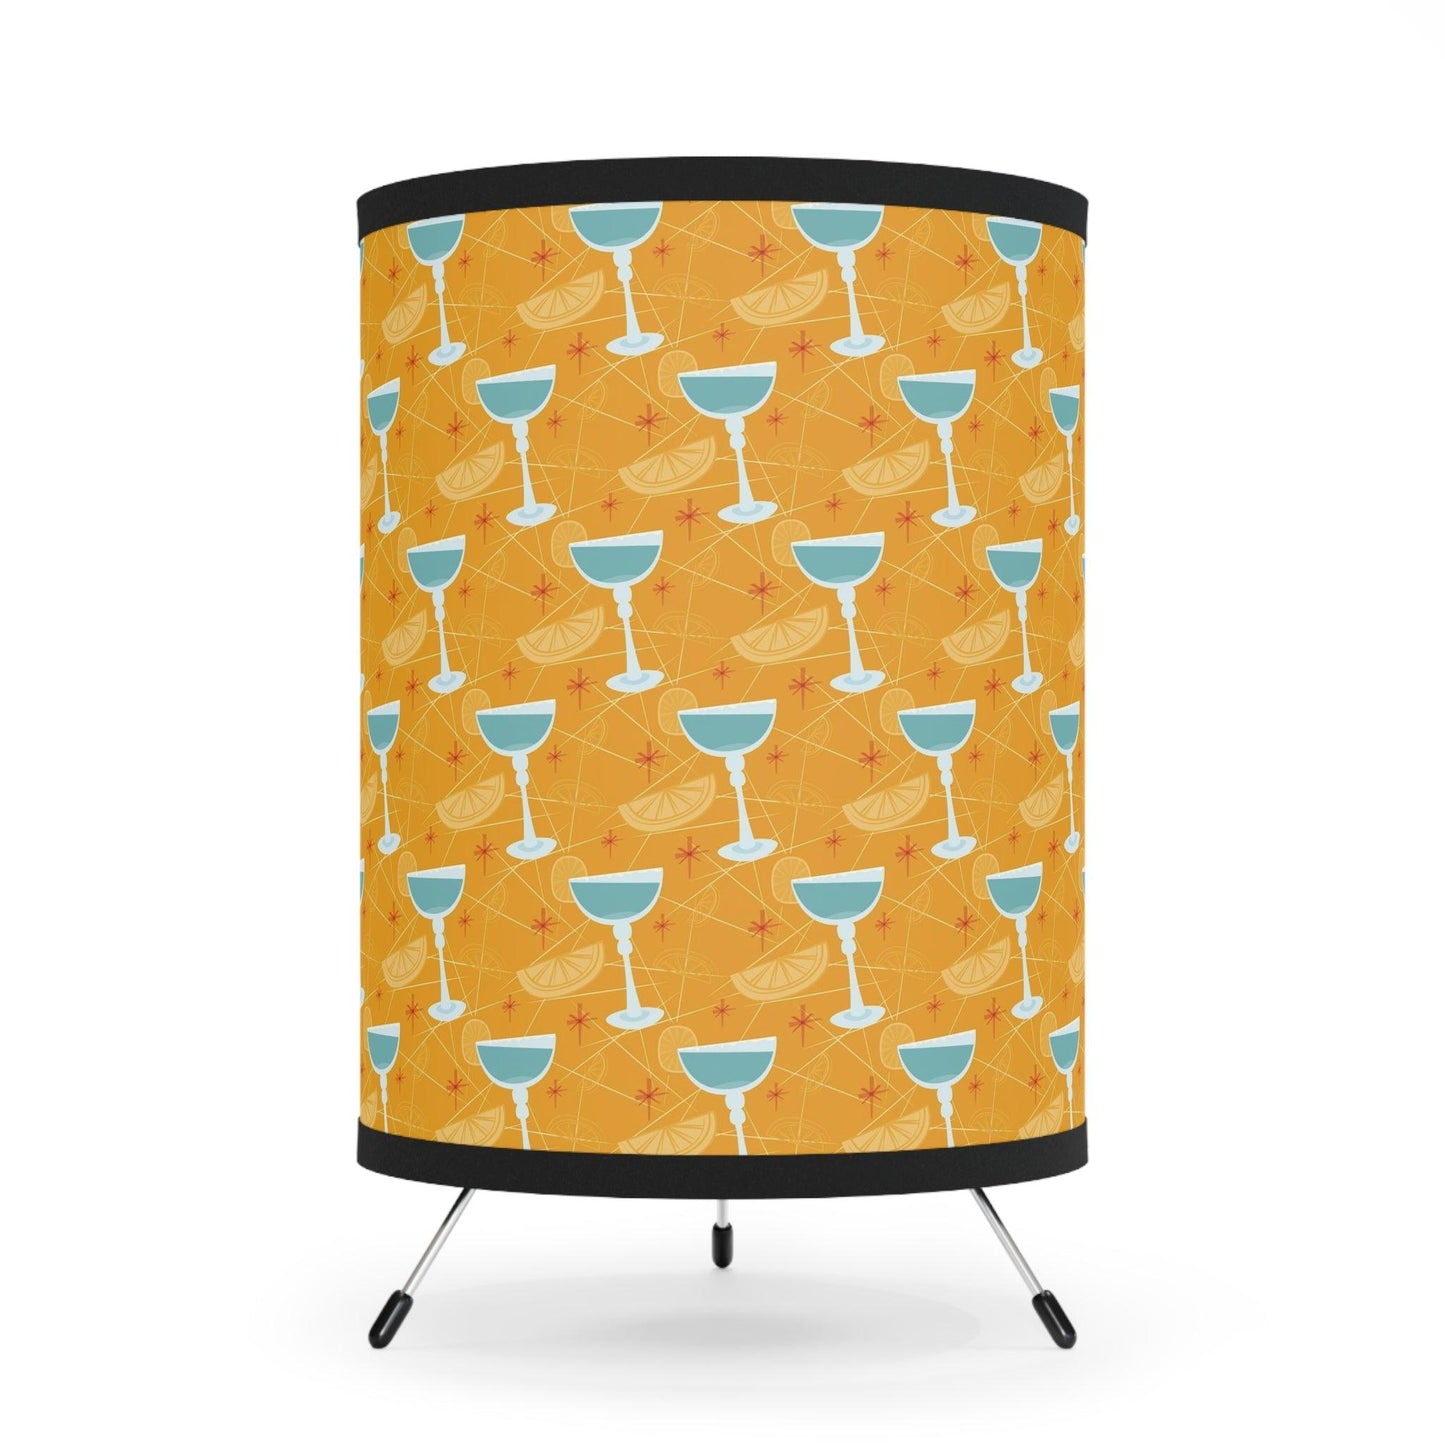 Retro 50s Kitsch Mid Century Cocktails Yellow and Blue Tabletop Accent Lamp | lovevisionkarma.com